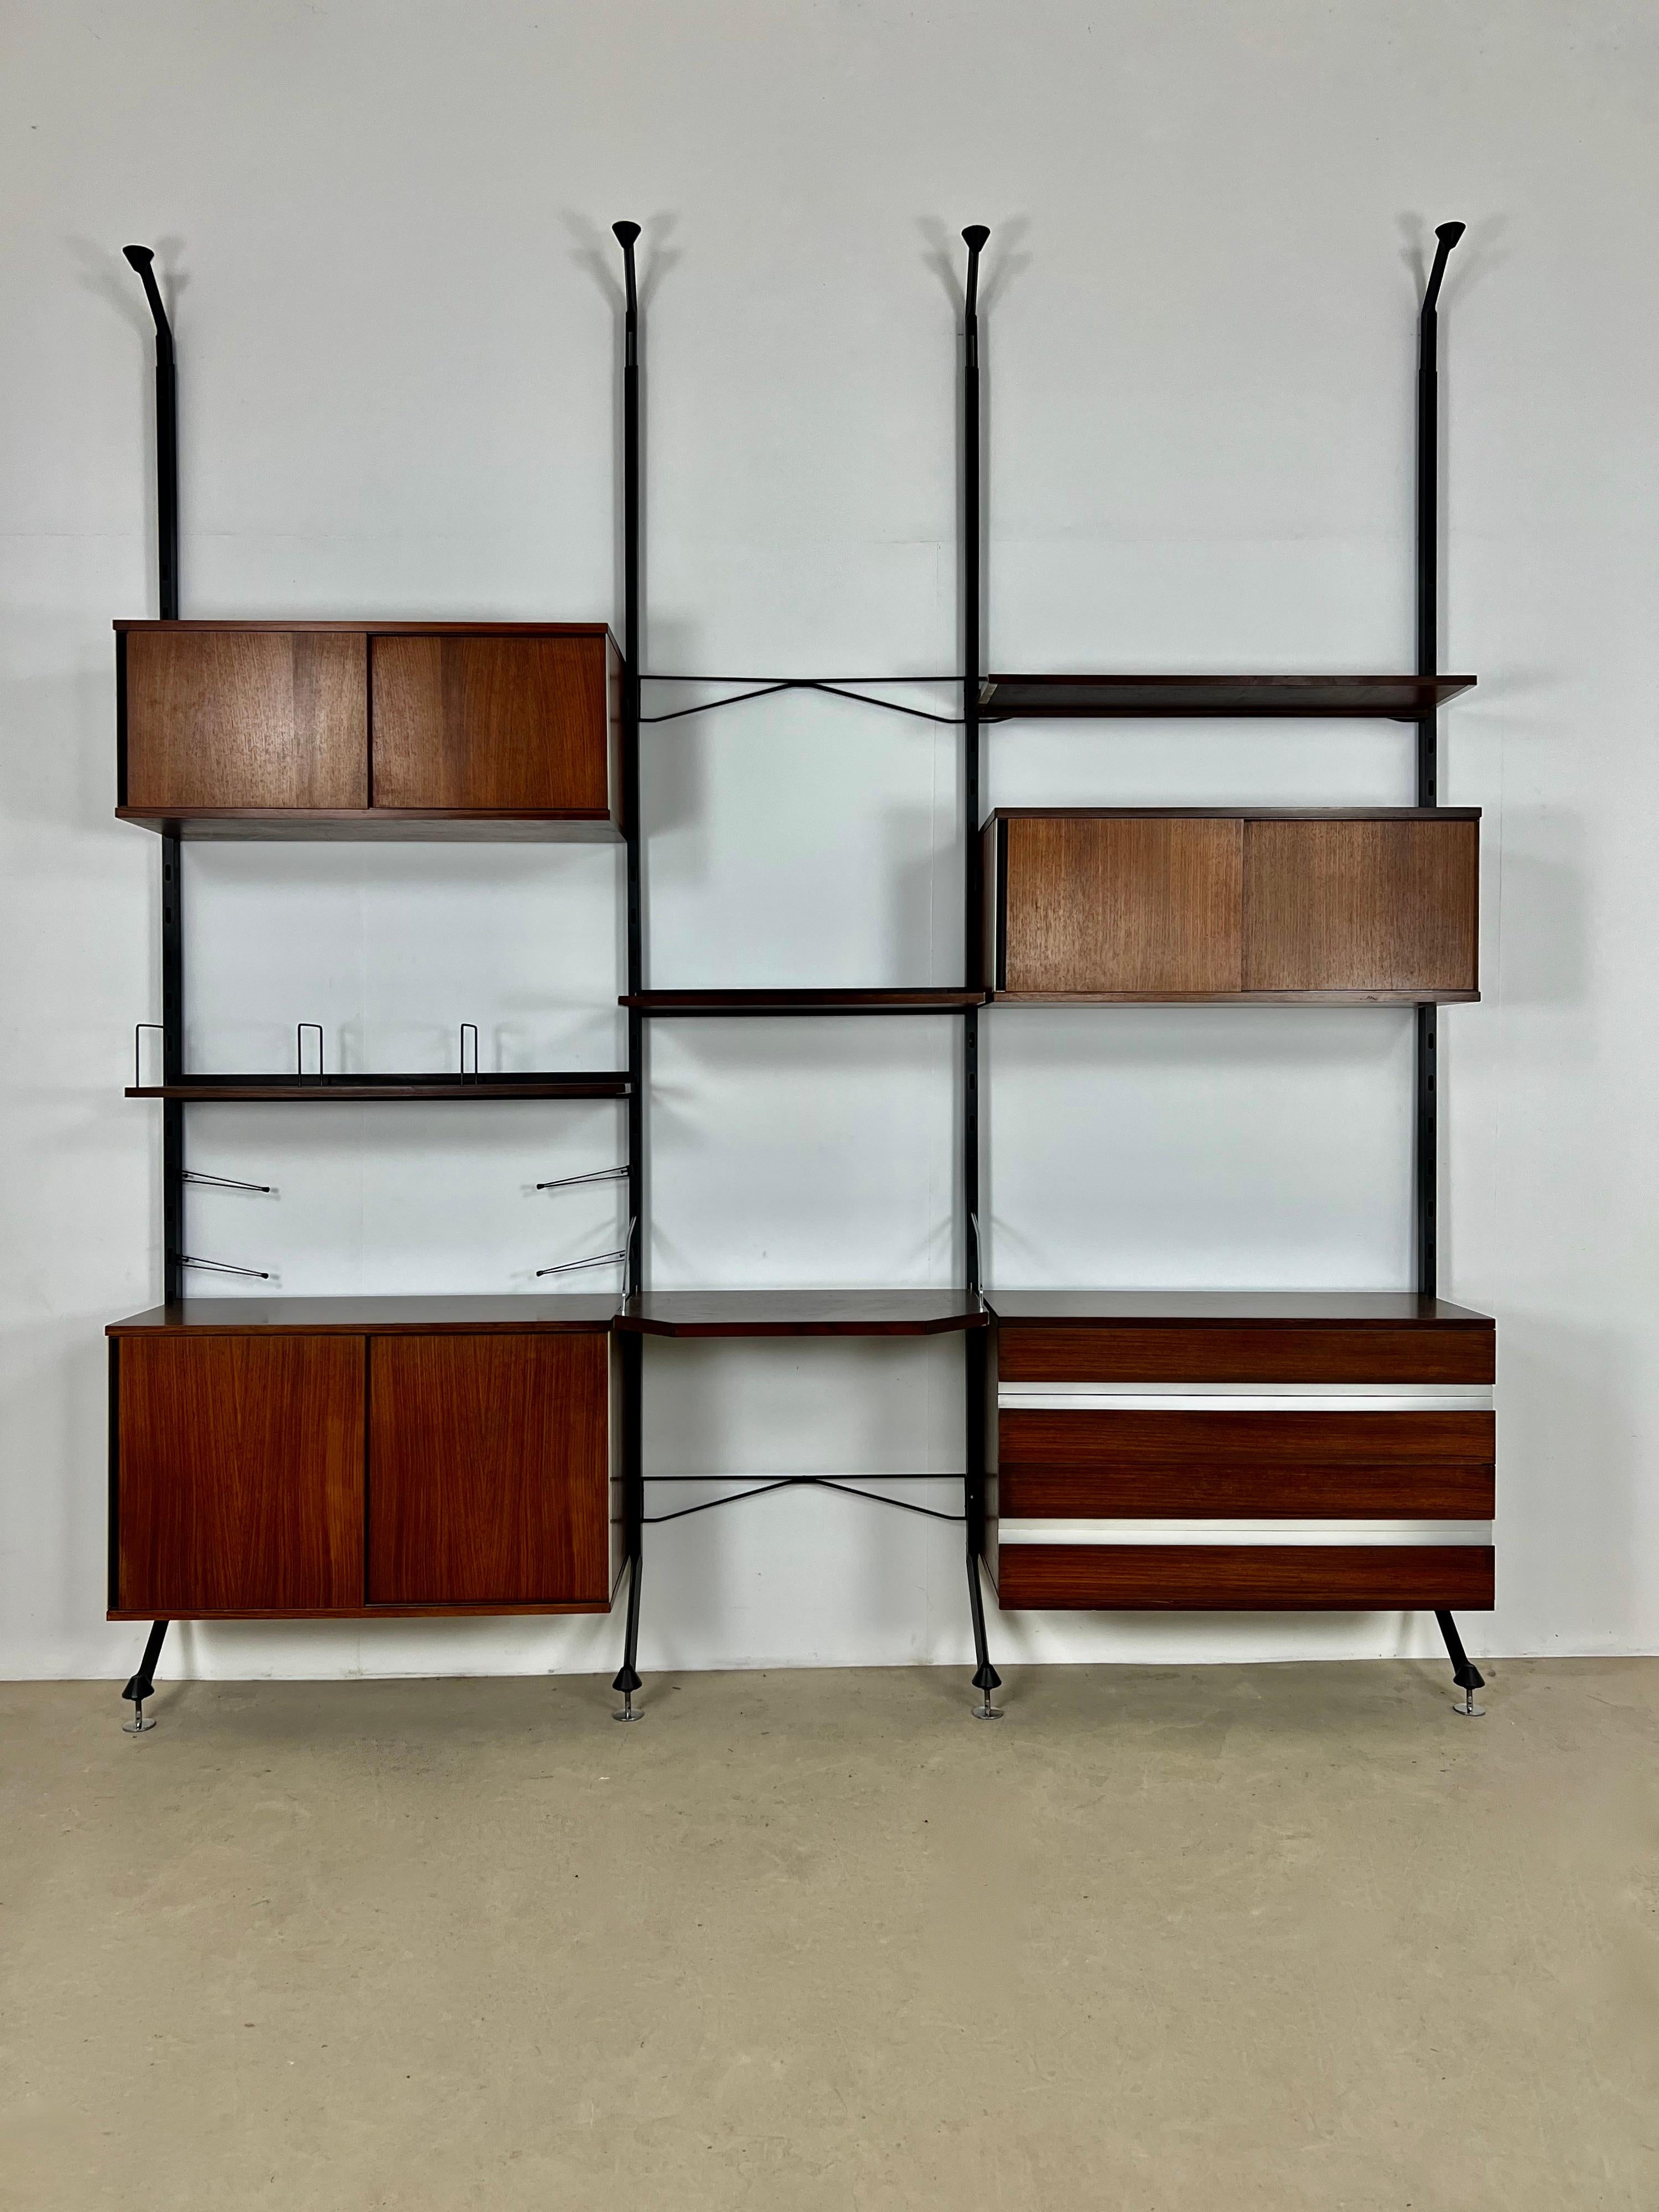 Wall unit composed of 4 uprights, 4 boards and 4 boxes, all adjustable in height min: 297cm max: 309cm. Wear due to time and age of the wall unit. Stamped MIM ROMA.